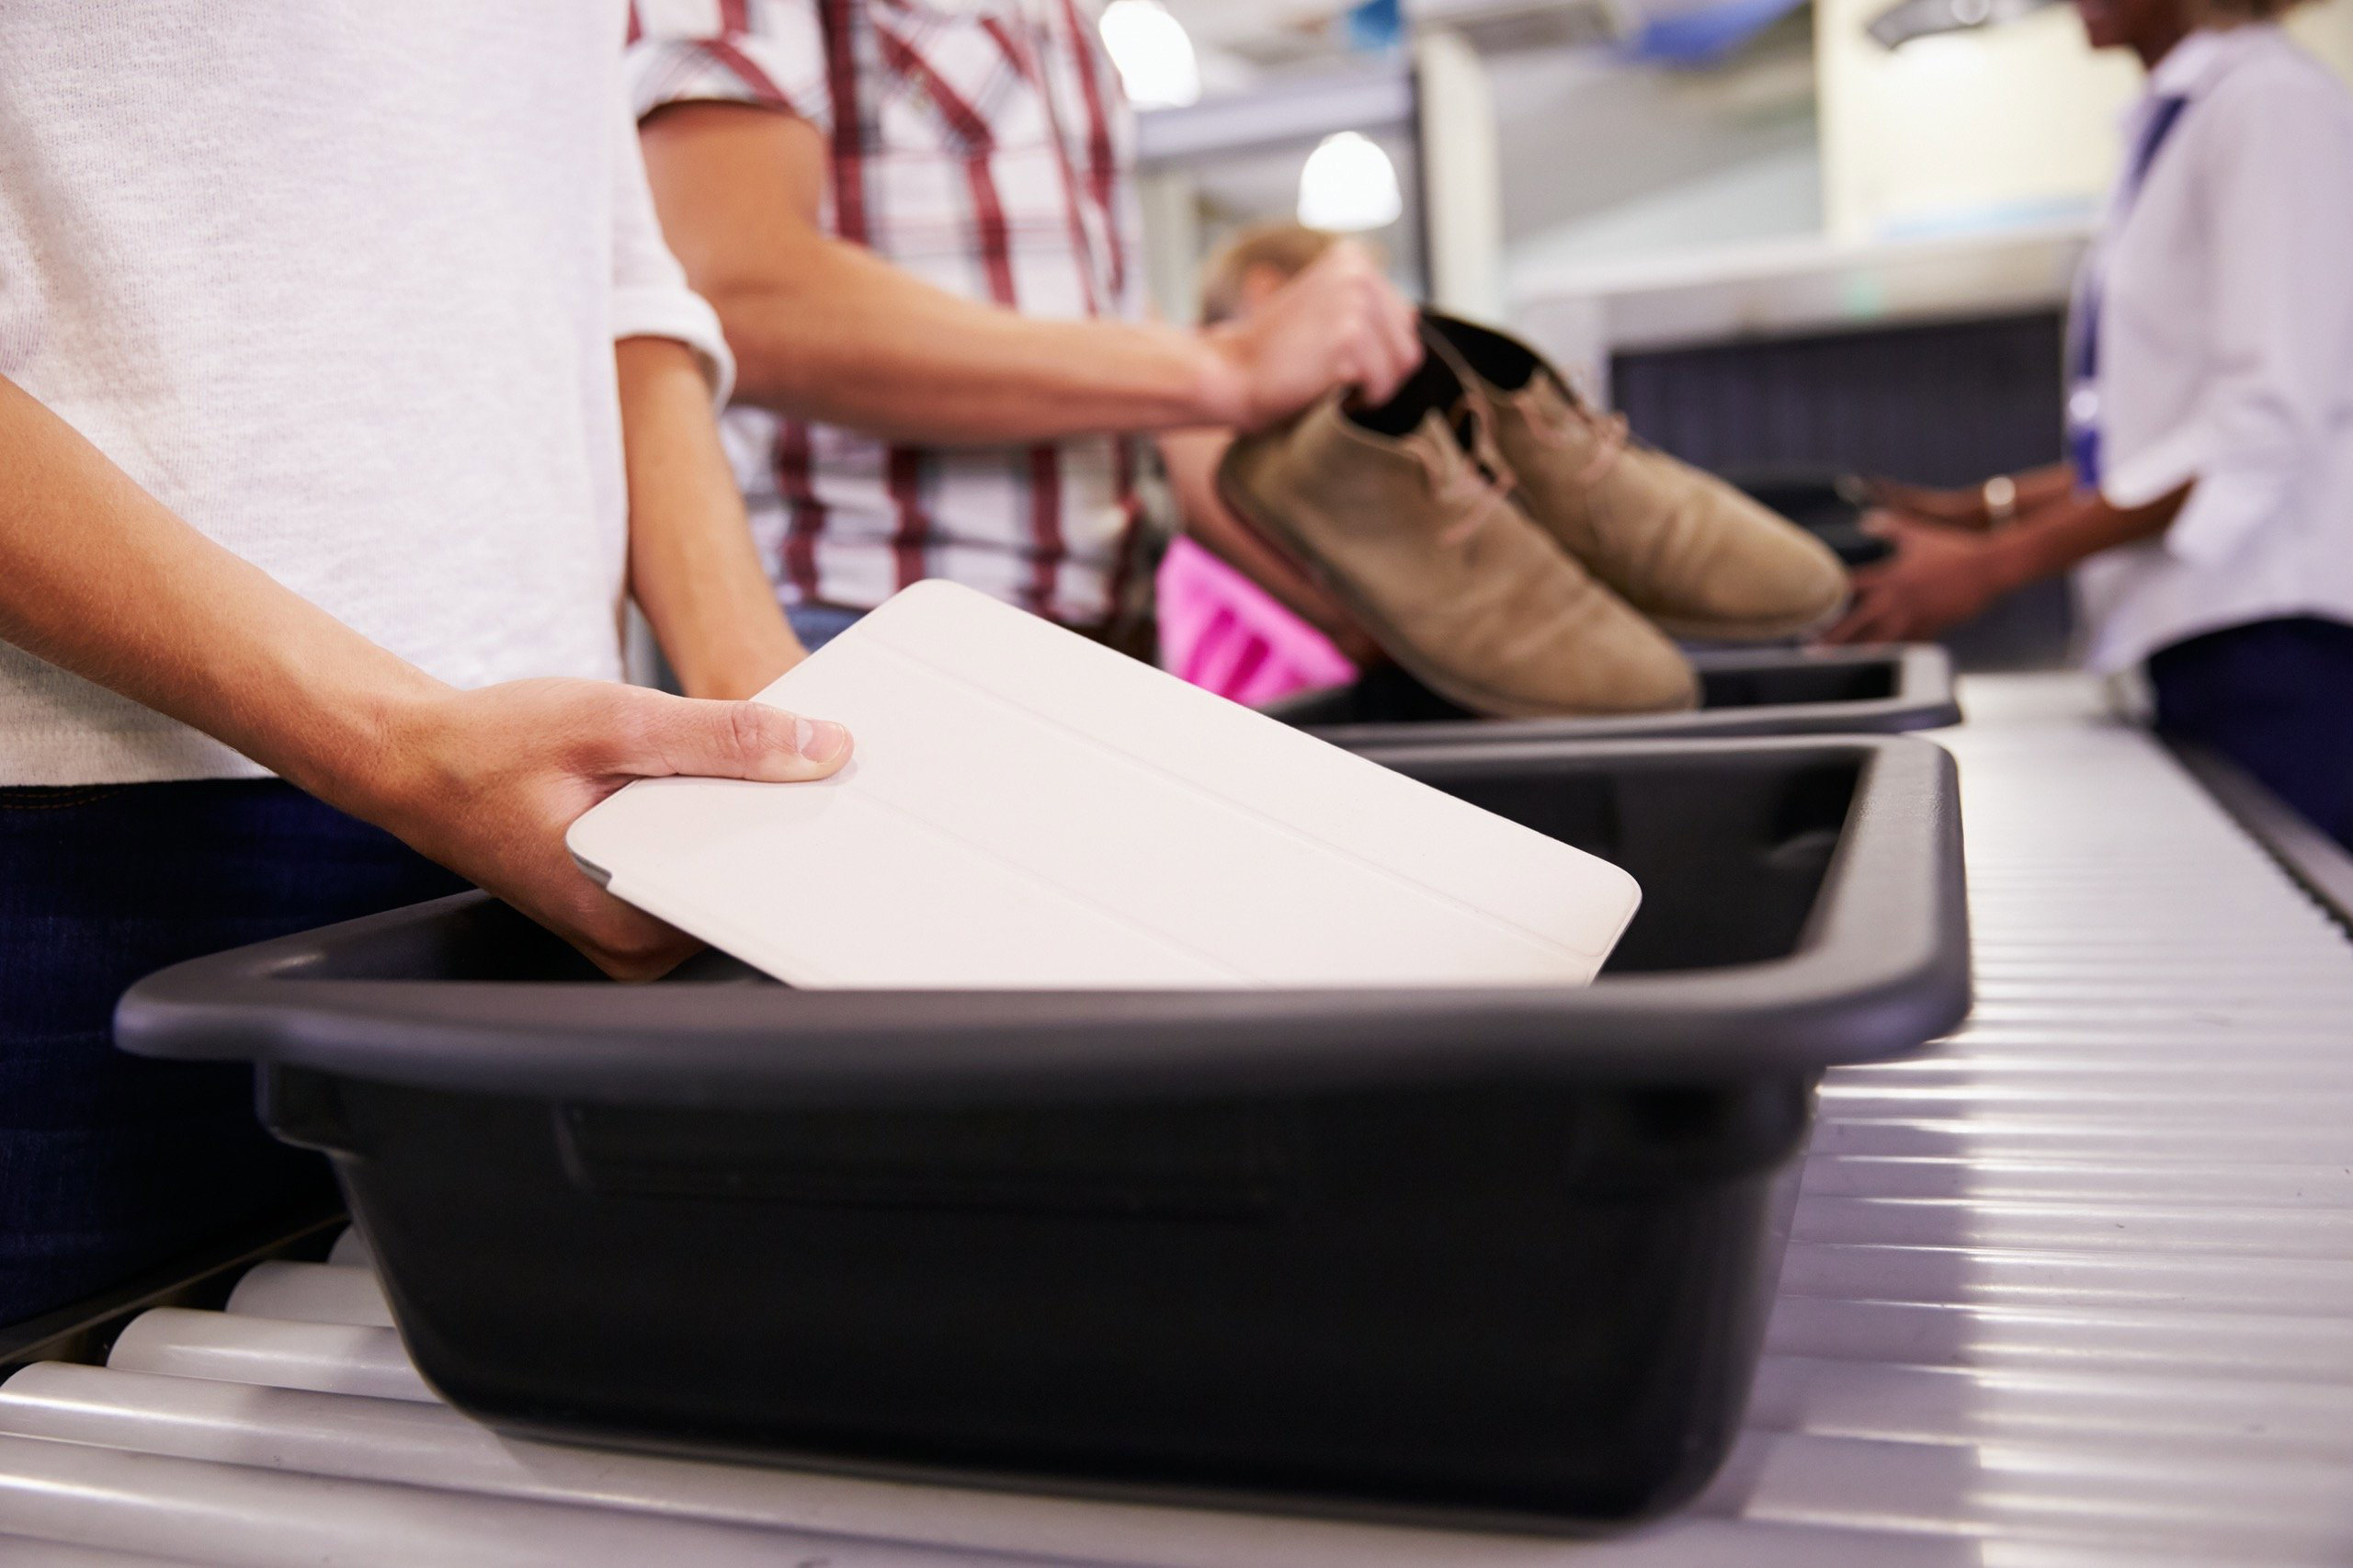 Tsa Precheck Vs Global Entry Vs Clear Which Is The Best Way To Speed Through Airport Security